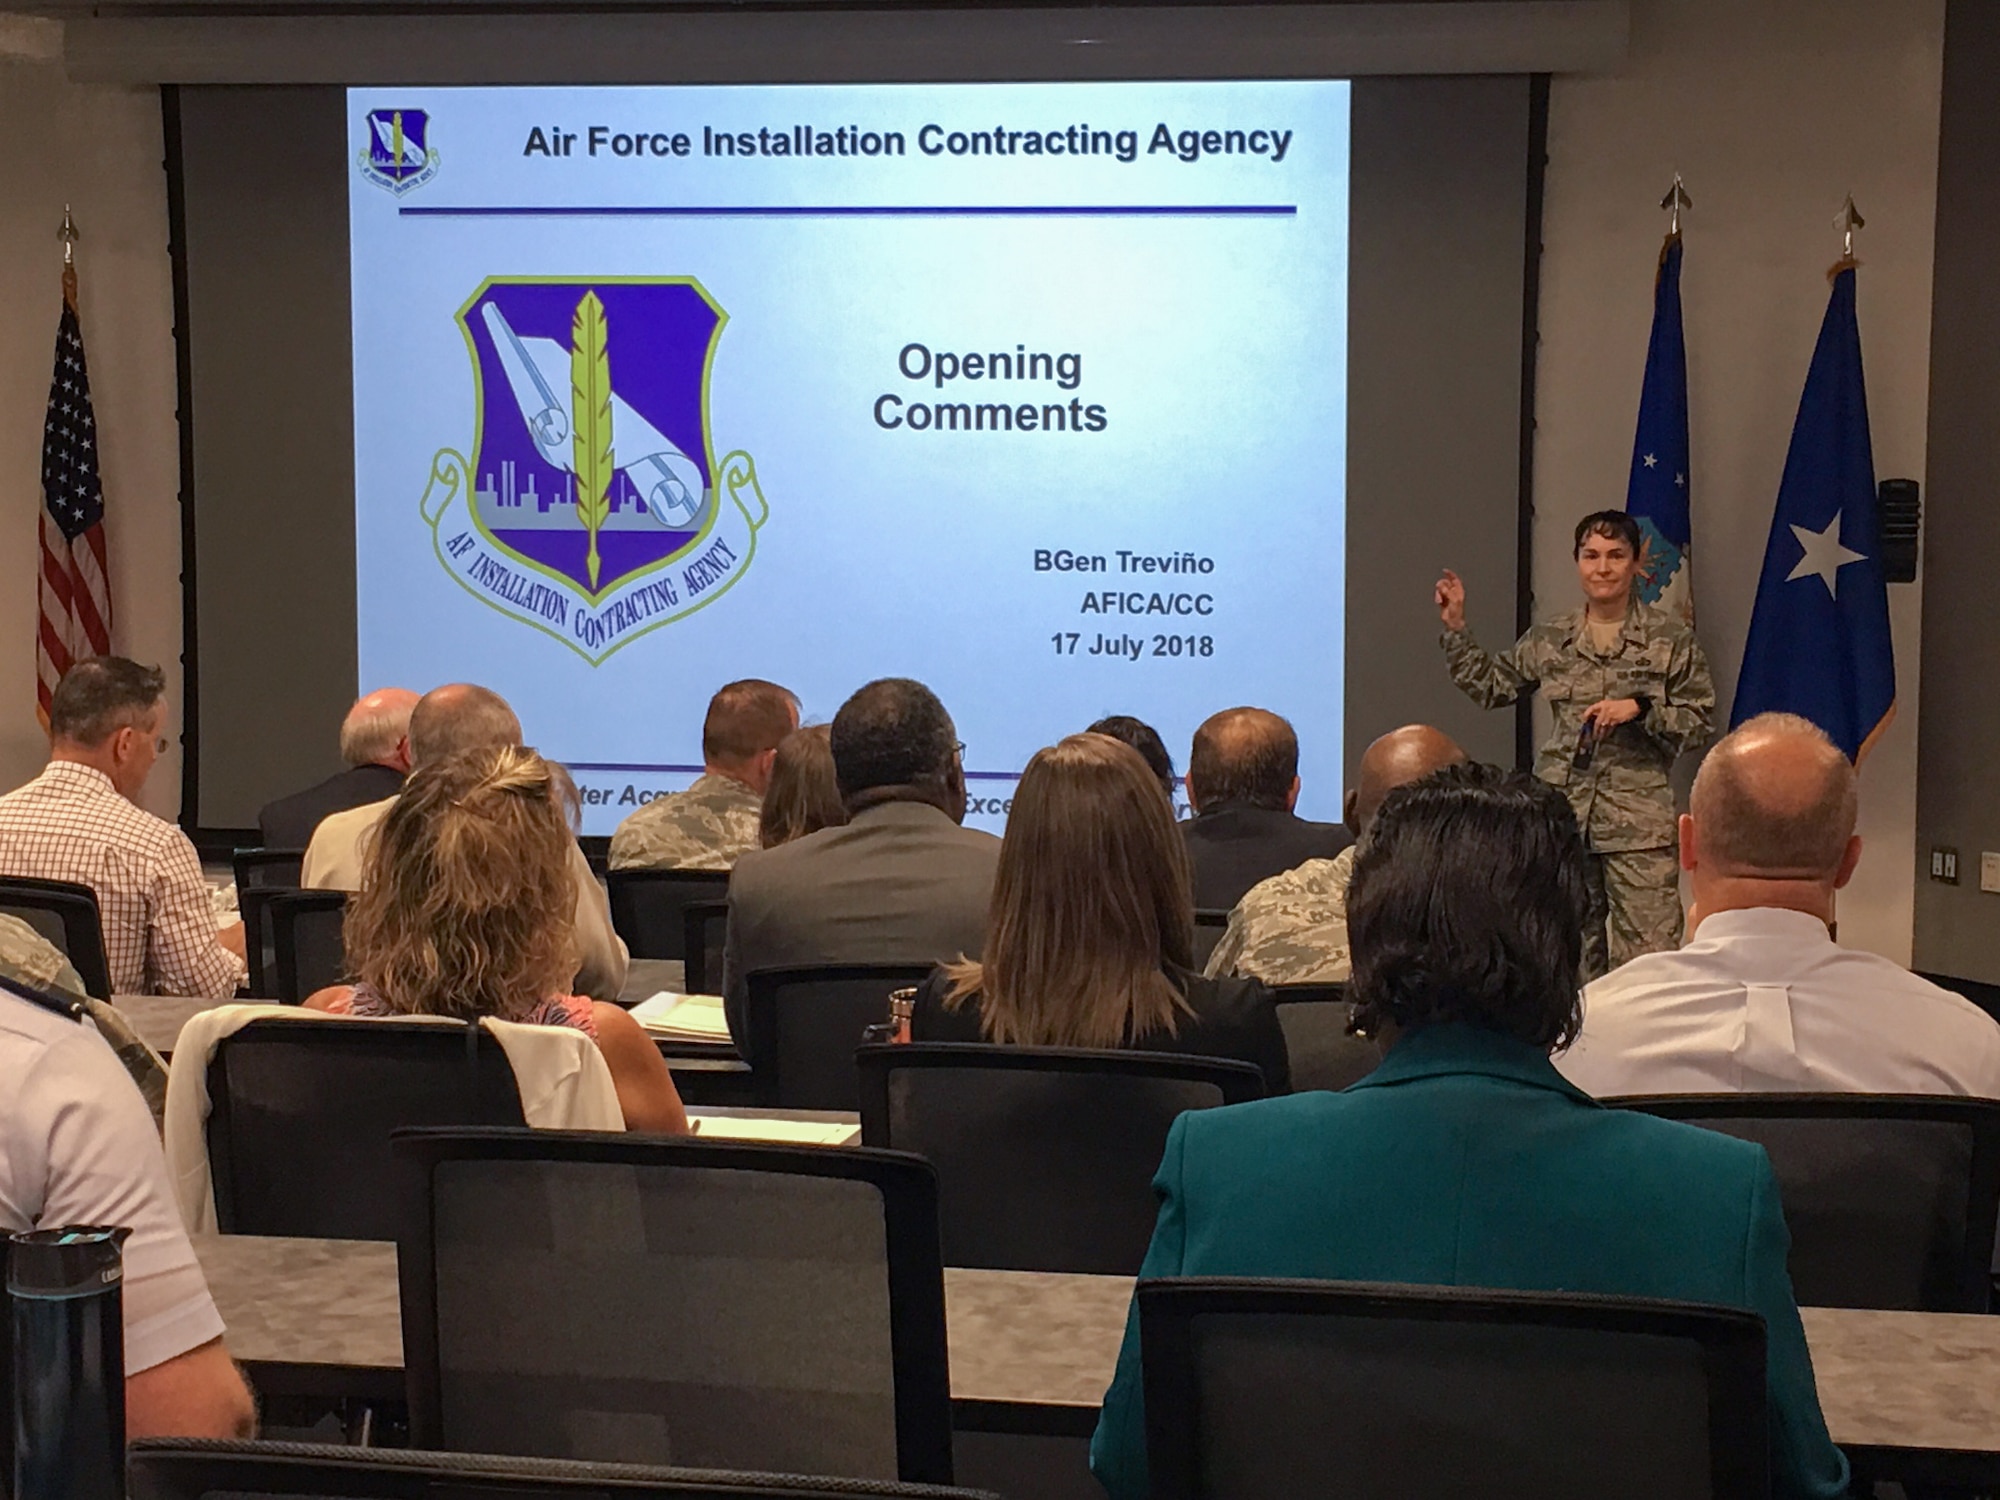 Brig. Gen. Alice W. Treviño, Air Force Installation Contracting Agency commander, delivers opening remarks at AFICA’s third annual Enterprise Sourcing Summit held at the Air Force Institute of Technology at Wright-Patterson Air Force Base July 17-18, 2018.